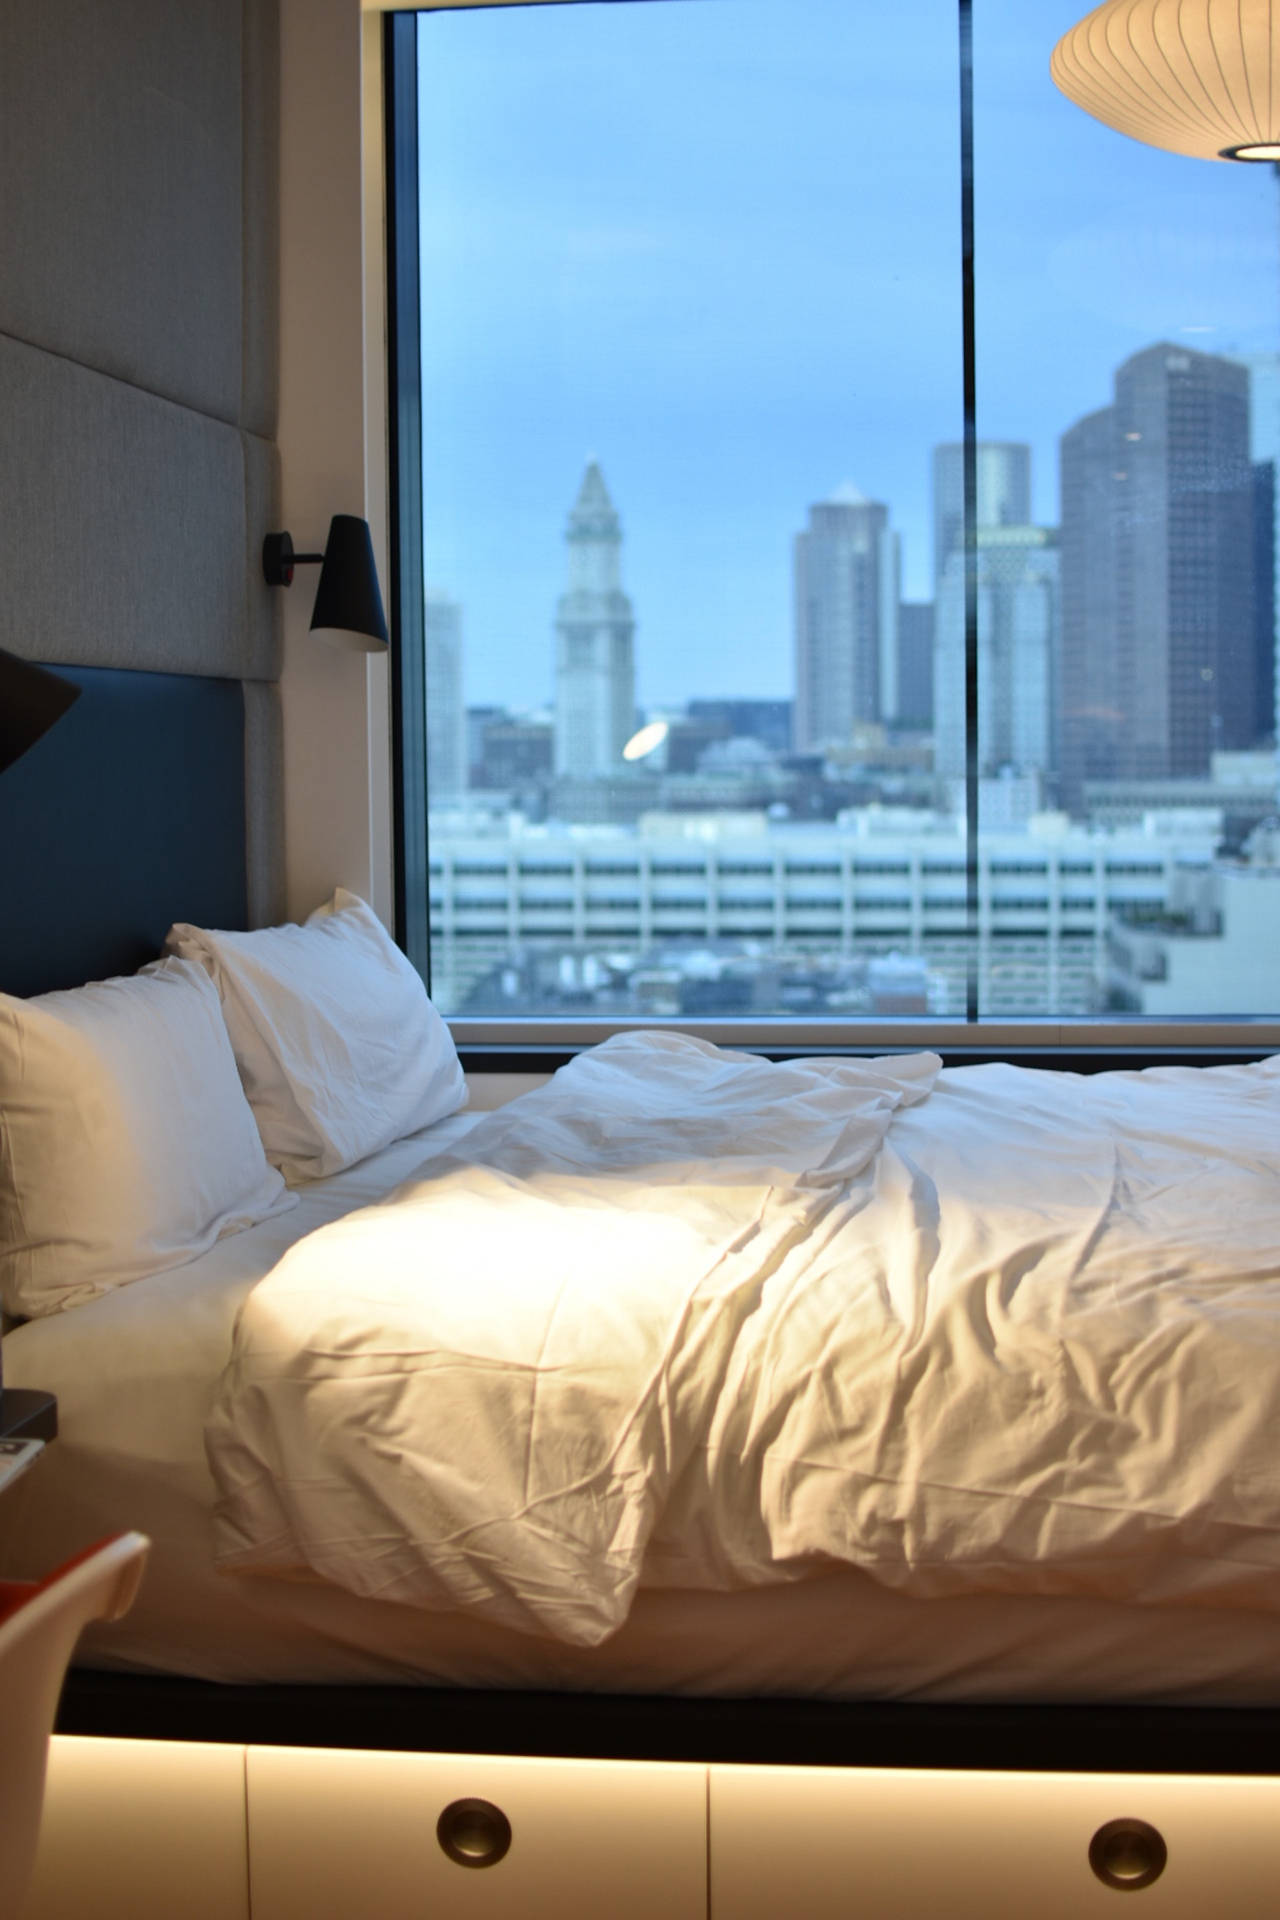 Hotel Bedroom With City View Background